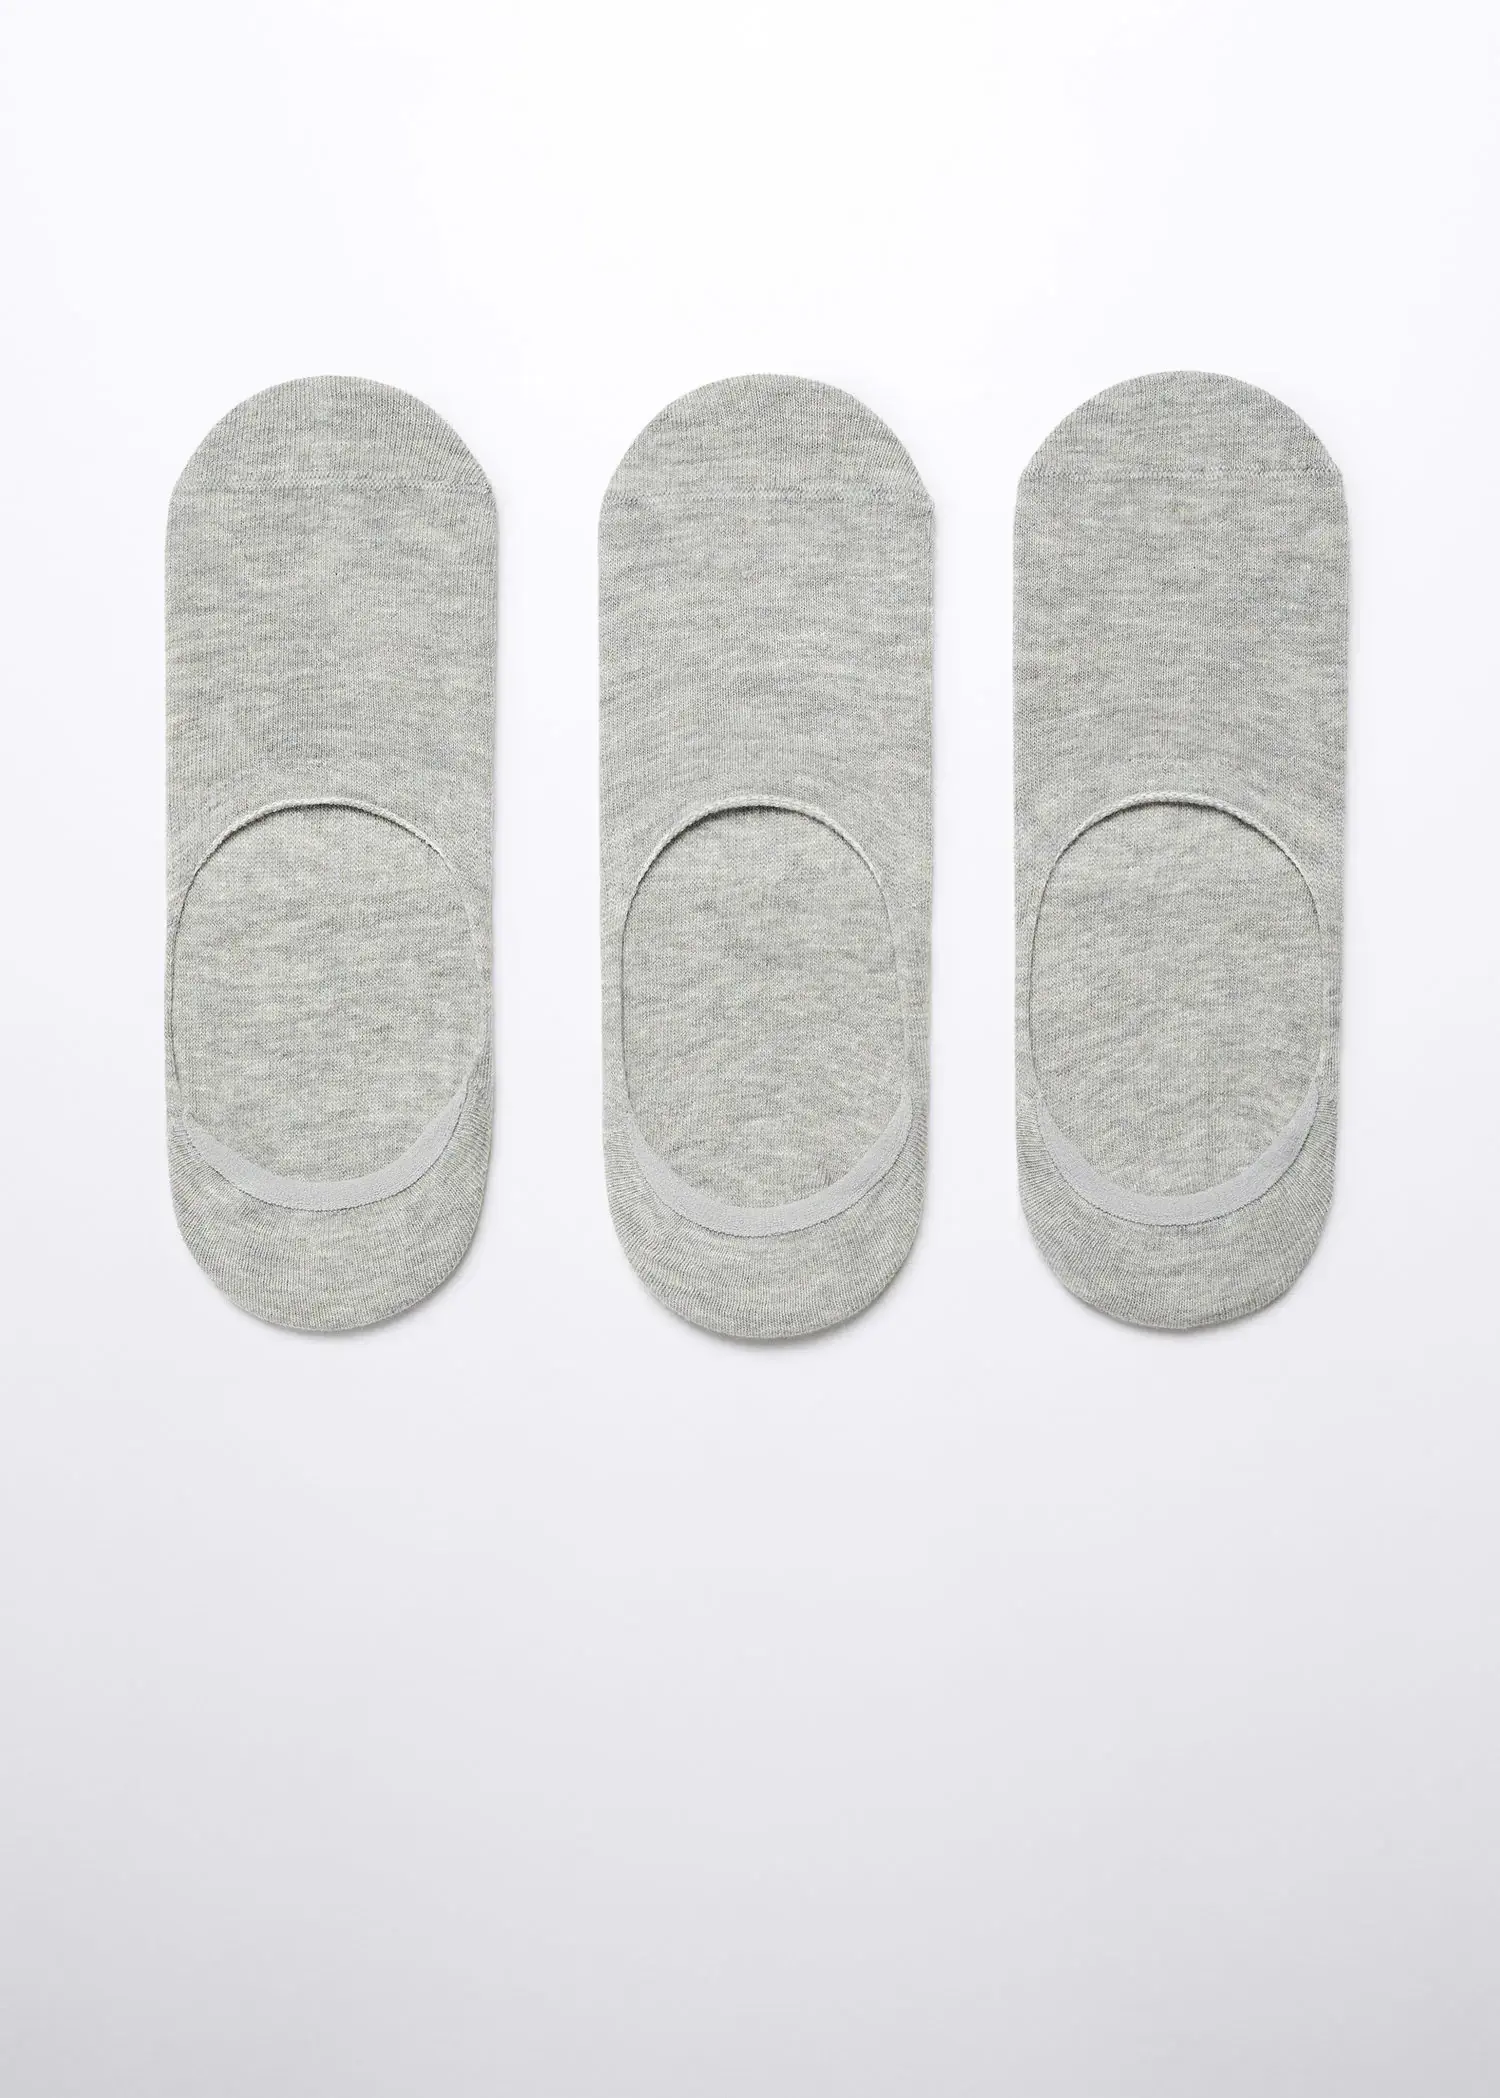 Mango 3-pack of invisible socks. a group of three pairs of foot pads on a white surface. 